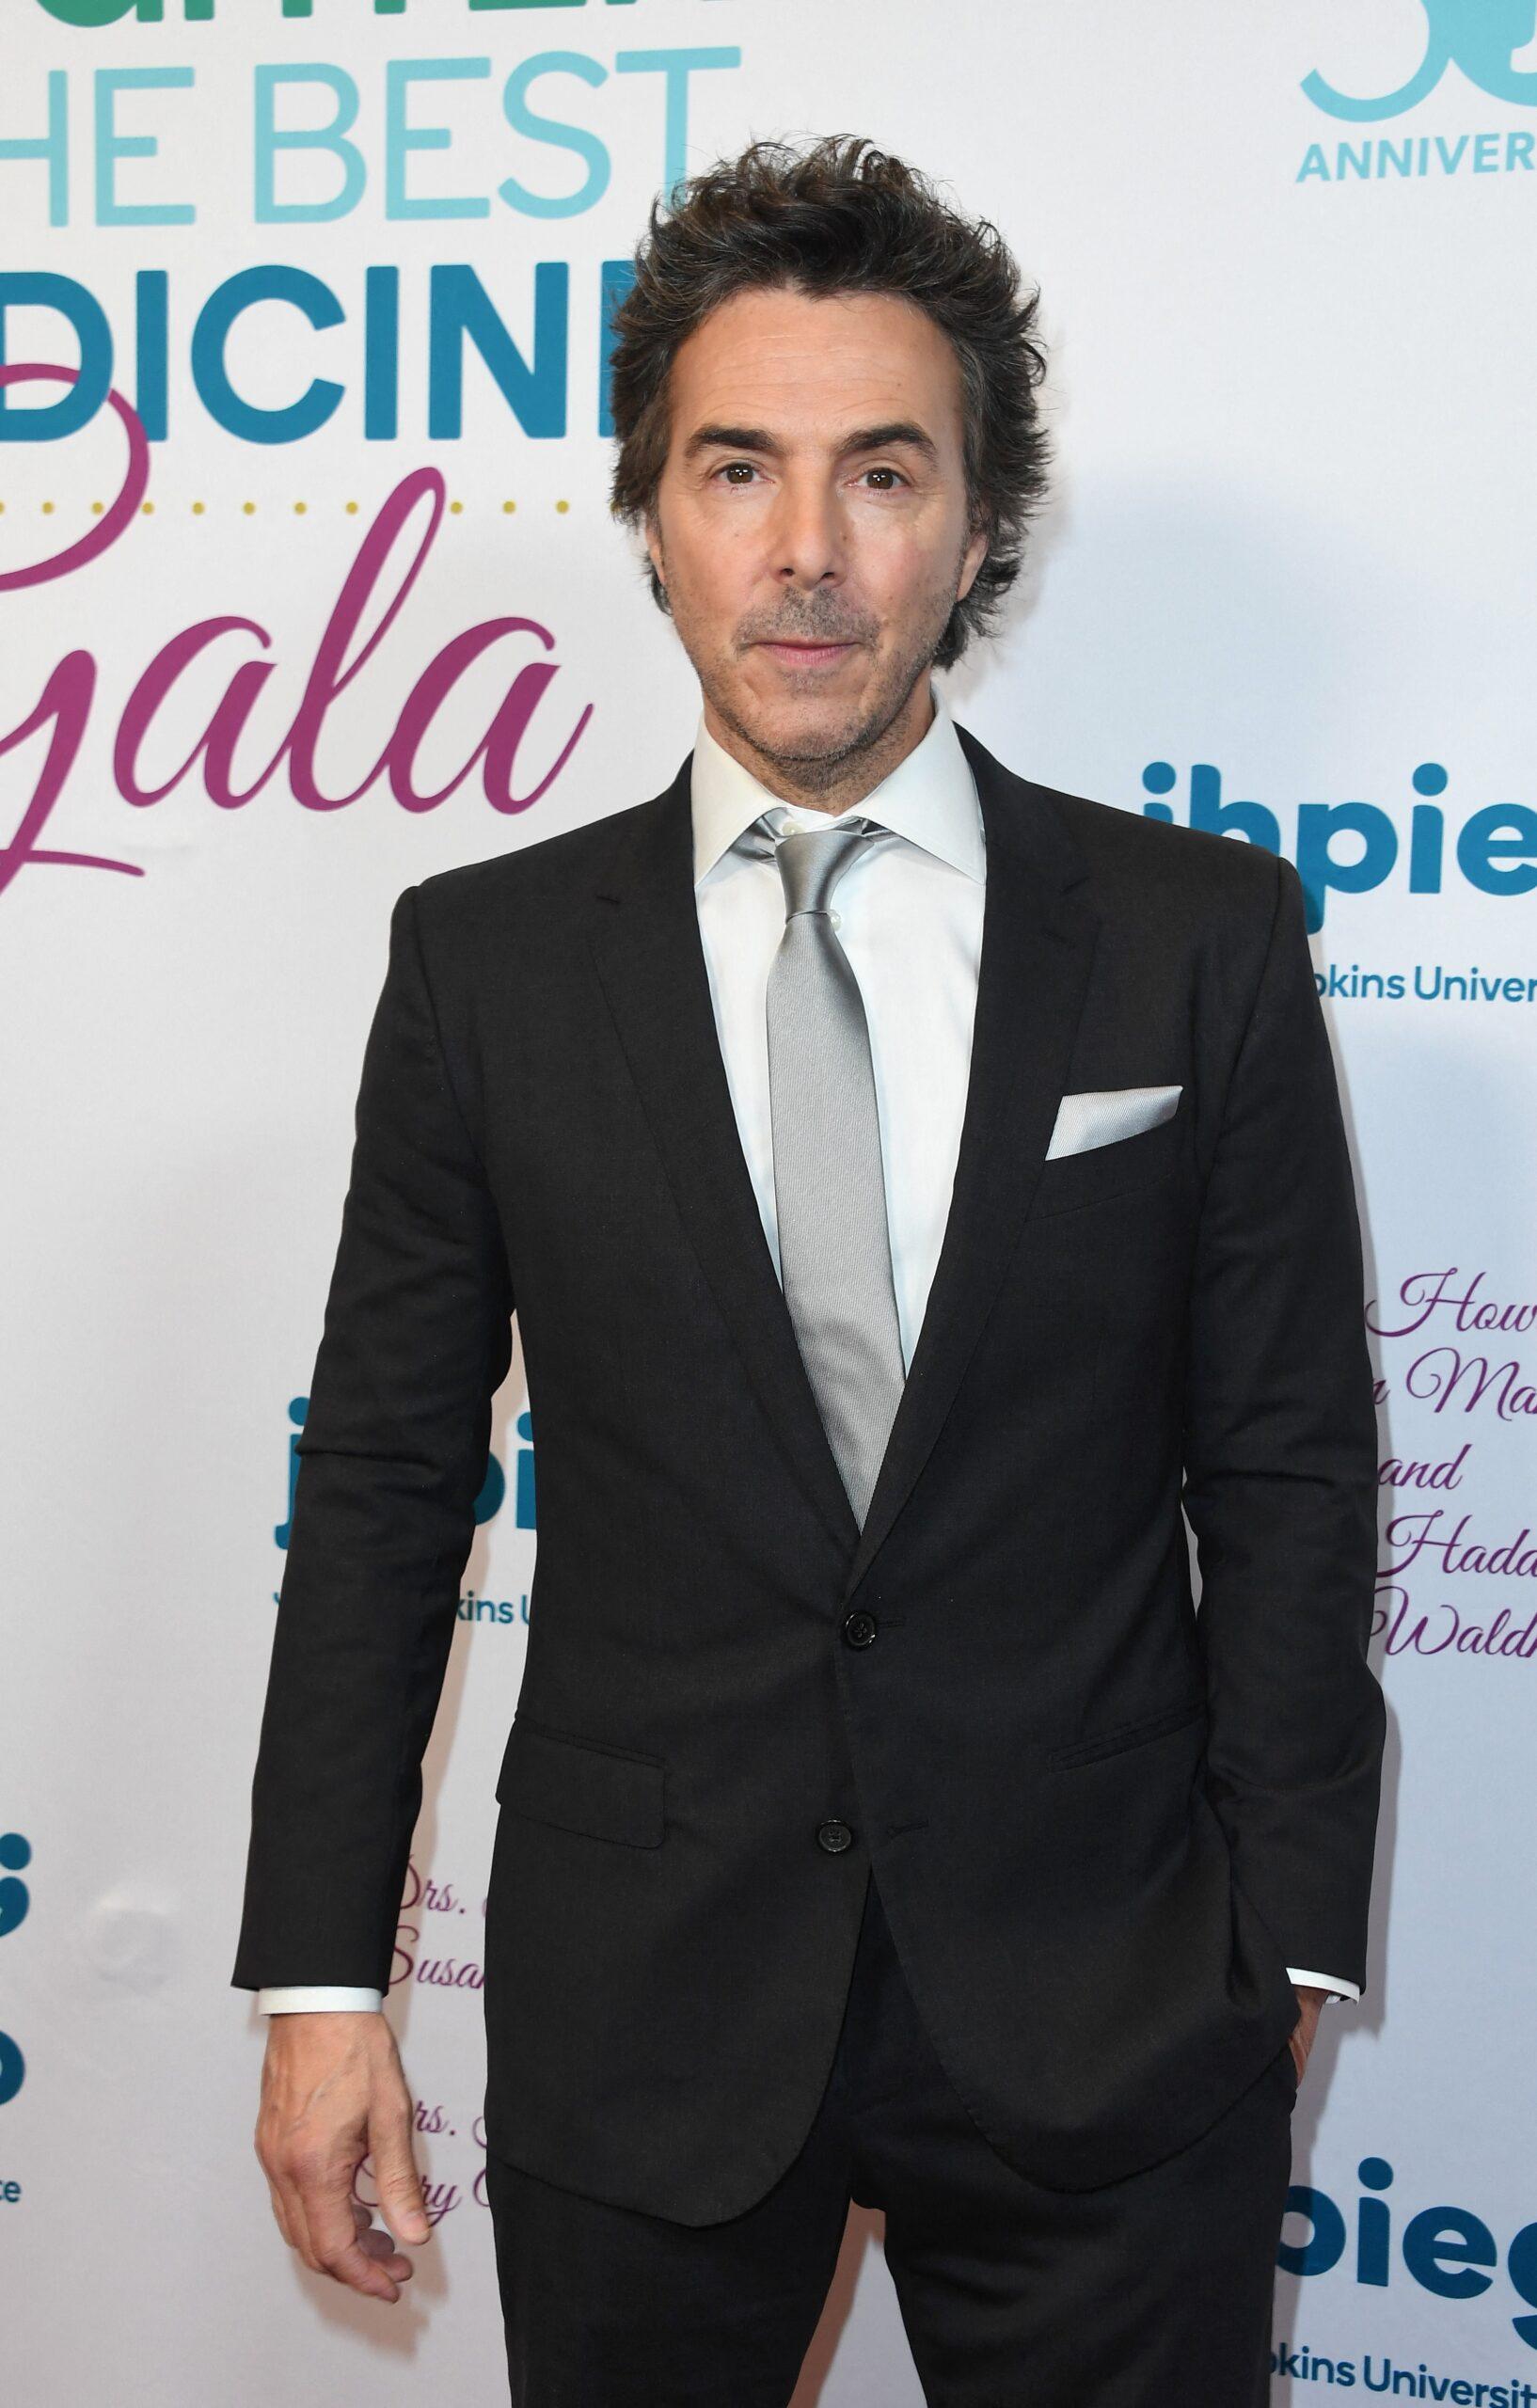 Shawn Levy in talks to create a Star Wars movie